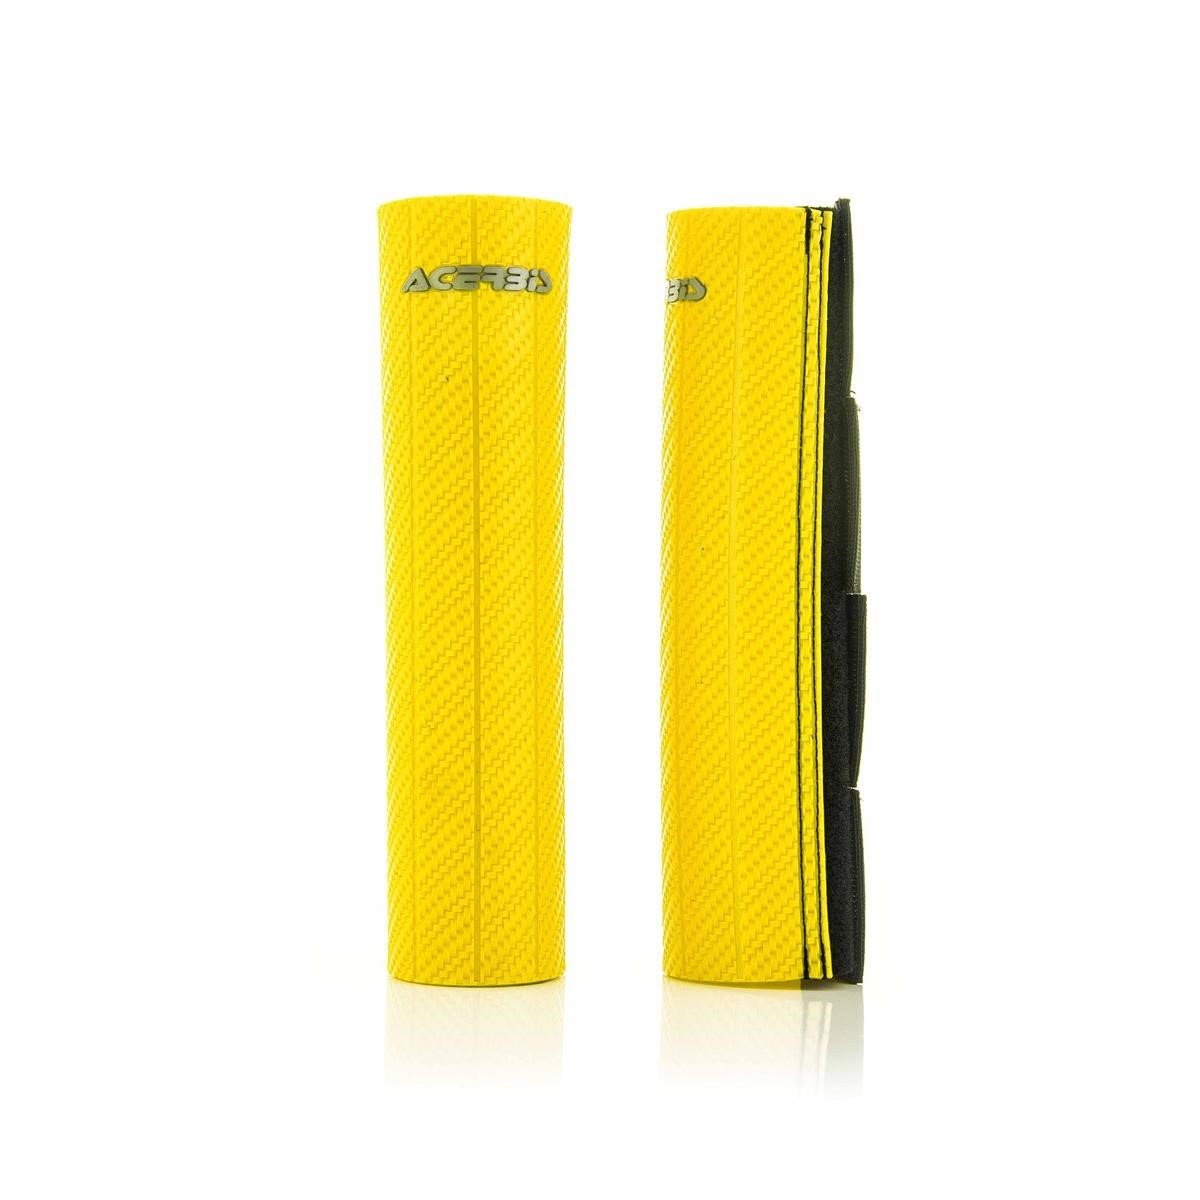 Acerbis Fork Guards  Upper, 47-48 mm, Yellow